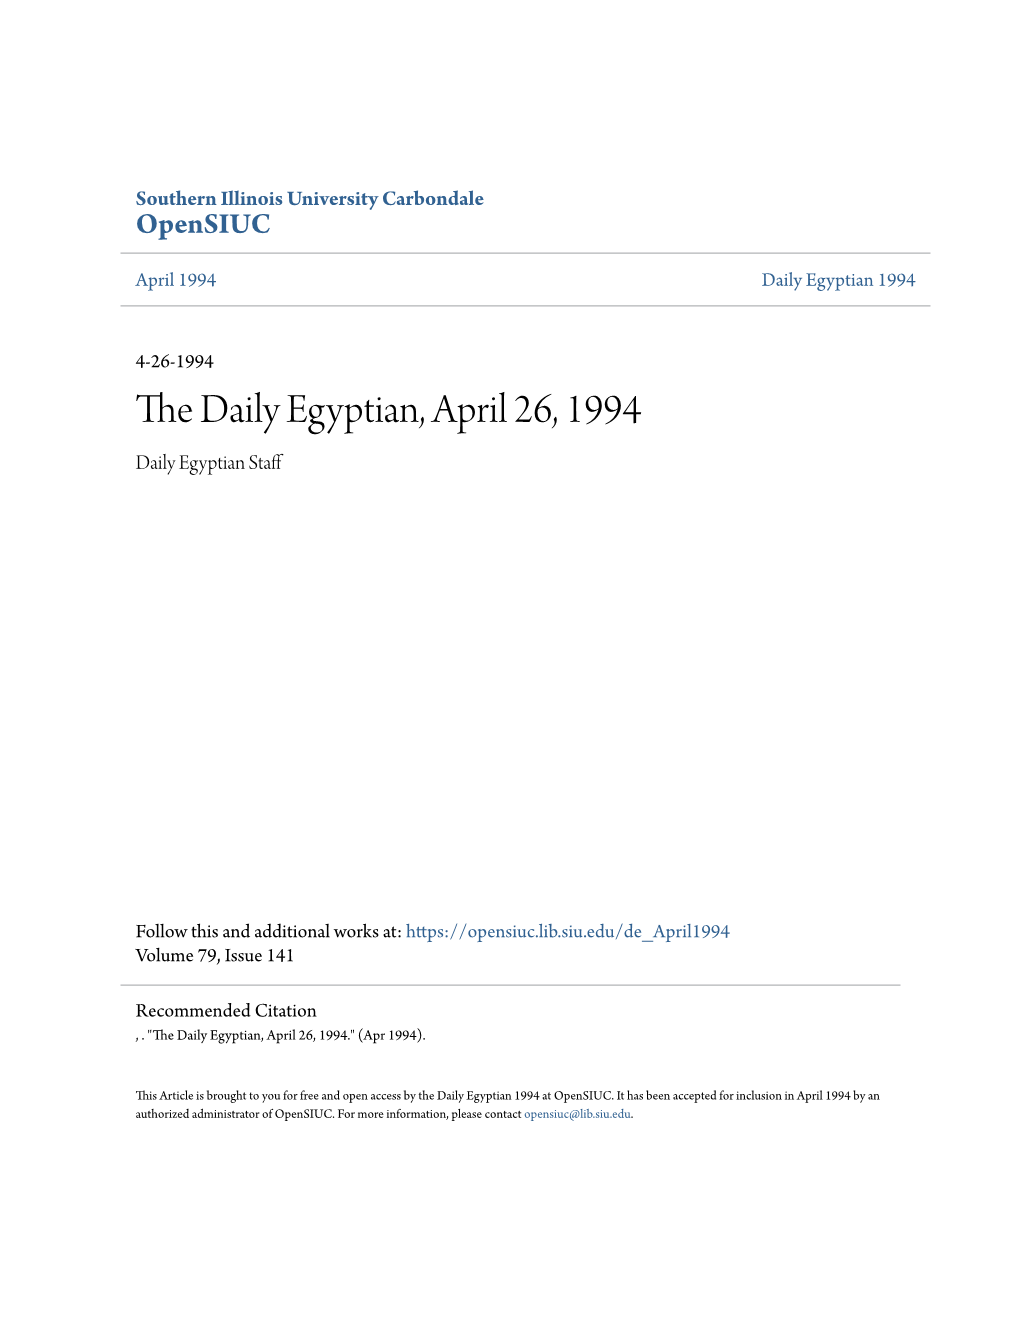 The Daily Egyptian, April 26, 1994